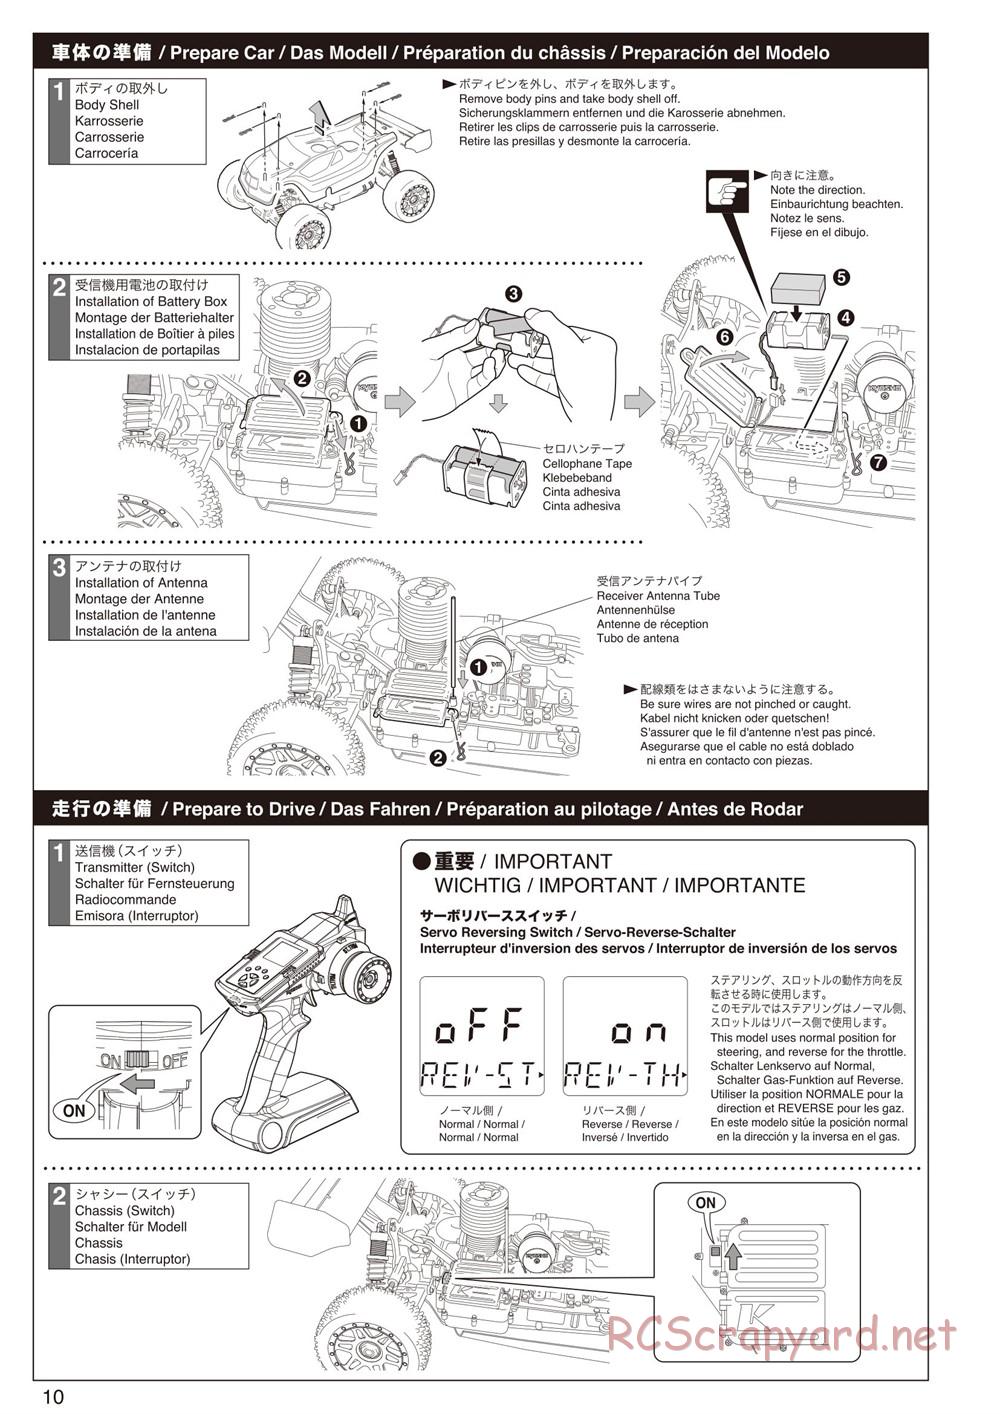 Kyosho - Inferno Neo ST - Manual - Page 10